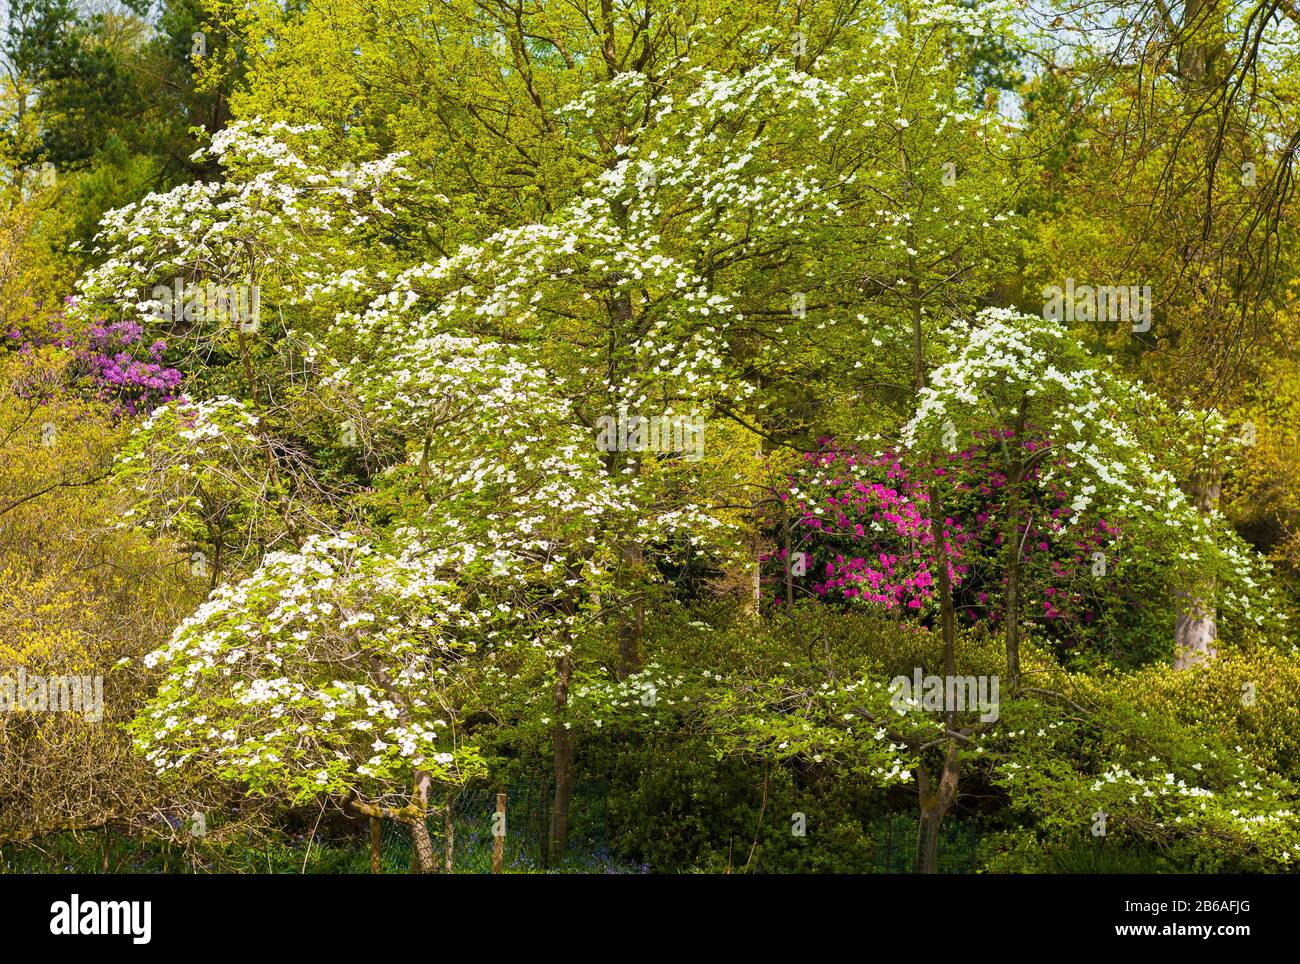 A mosaic of natural tree growth with Cornus flowering and deciduous trees bursting into life in Bowood gardens Wiltshire England UK Stock Photo